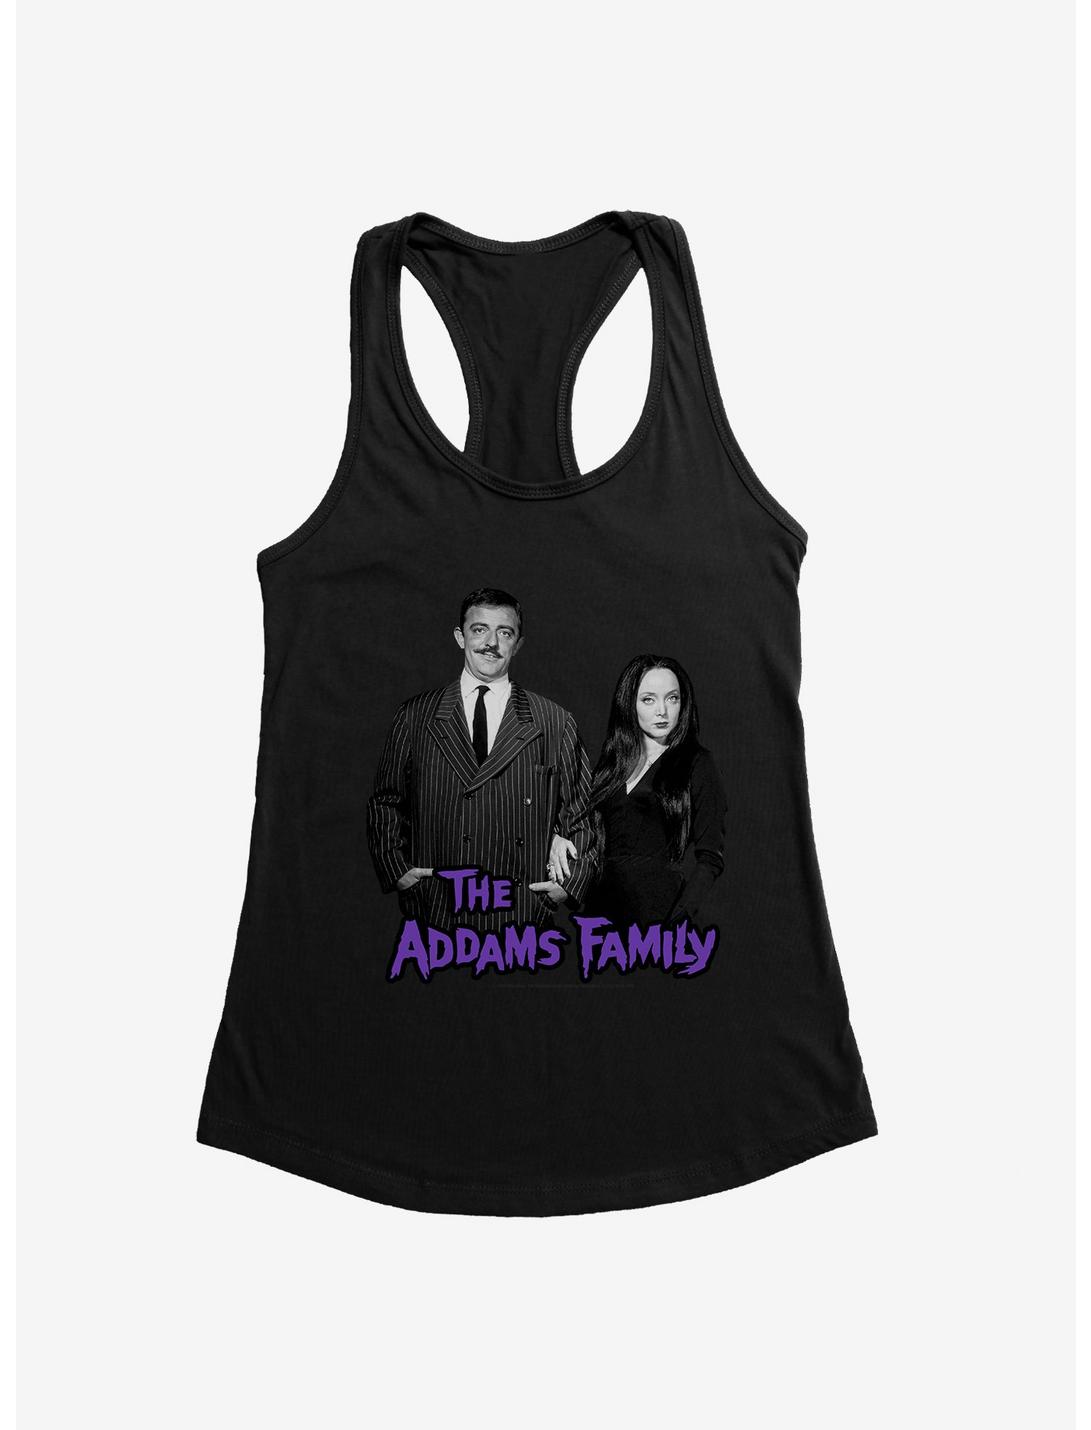 The Addams Family Gomez And Morticia Addams Womens Tank Top, BLACK, hi-res